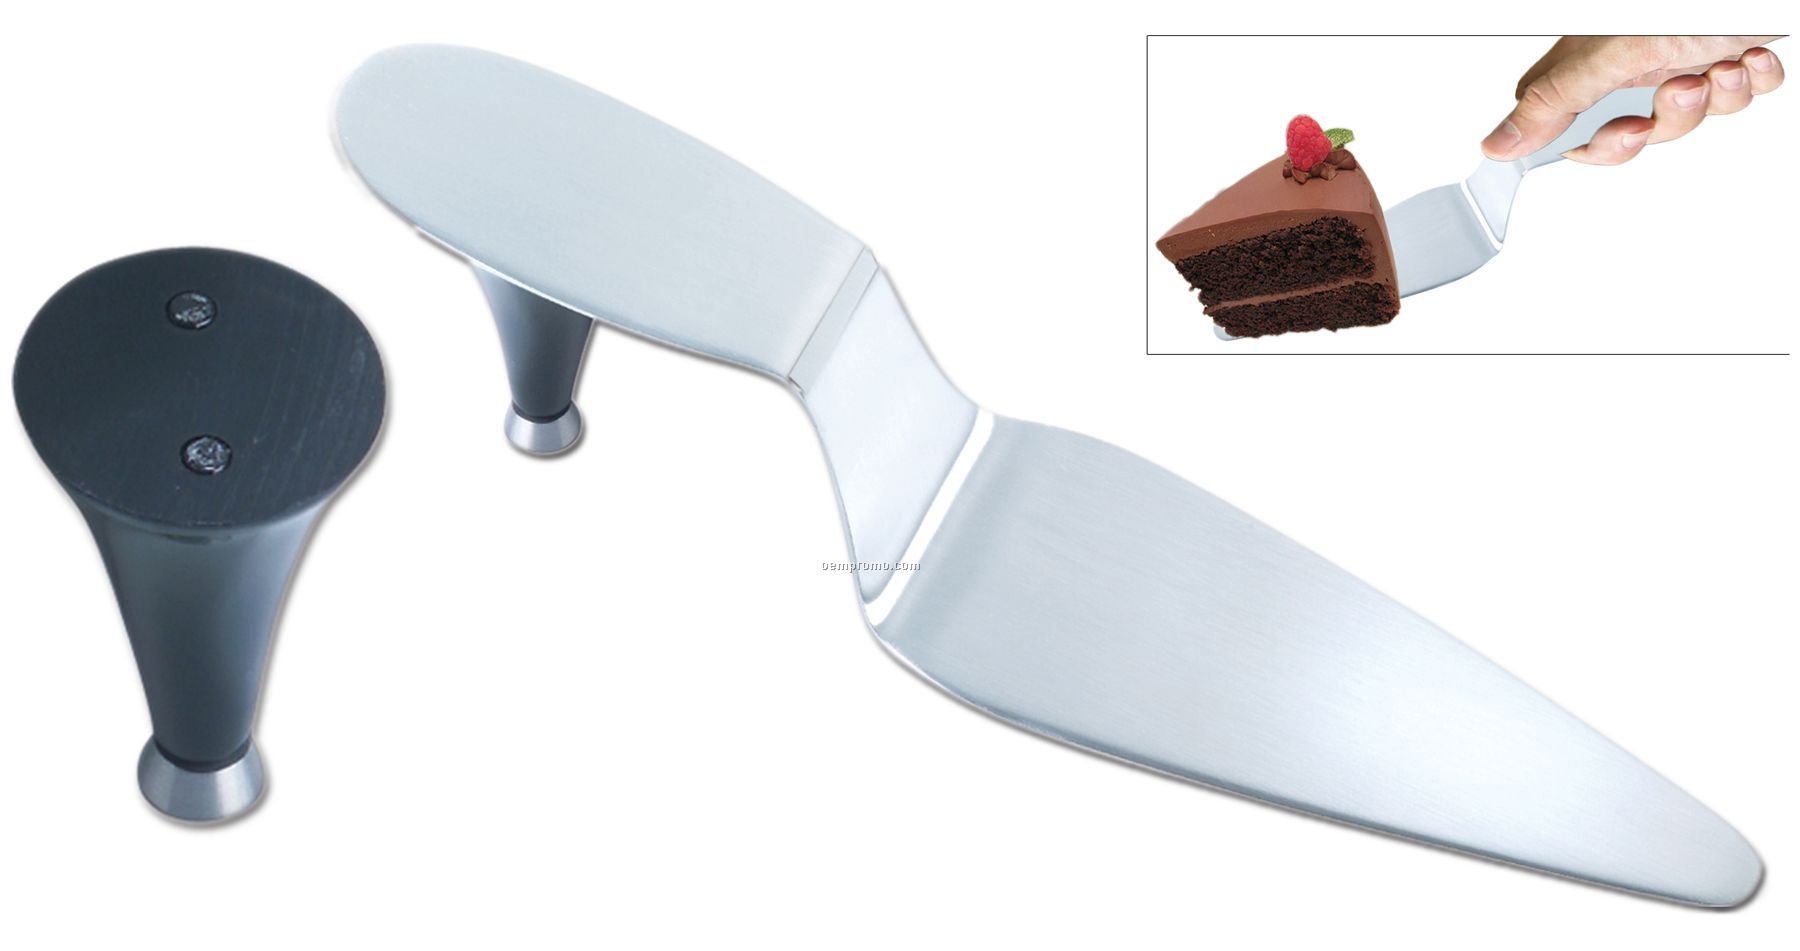 Stainless Steel Shoe Shaped Cake Server